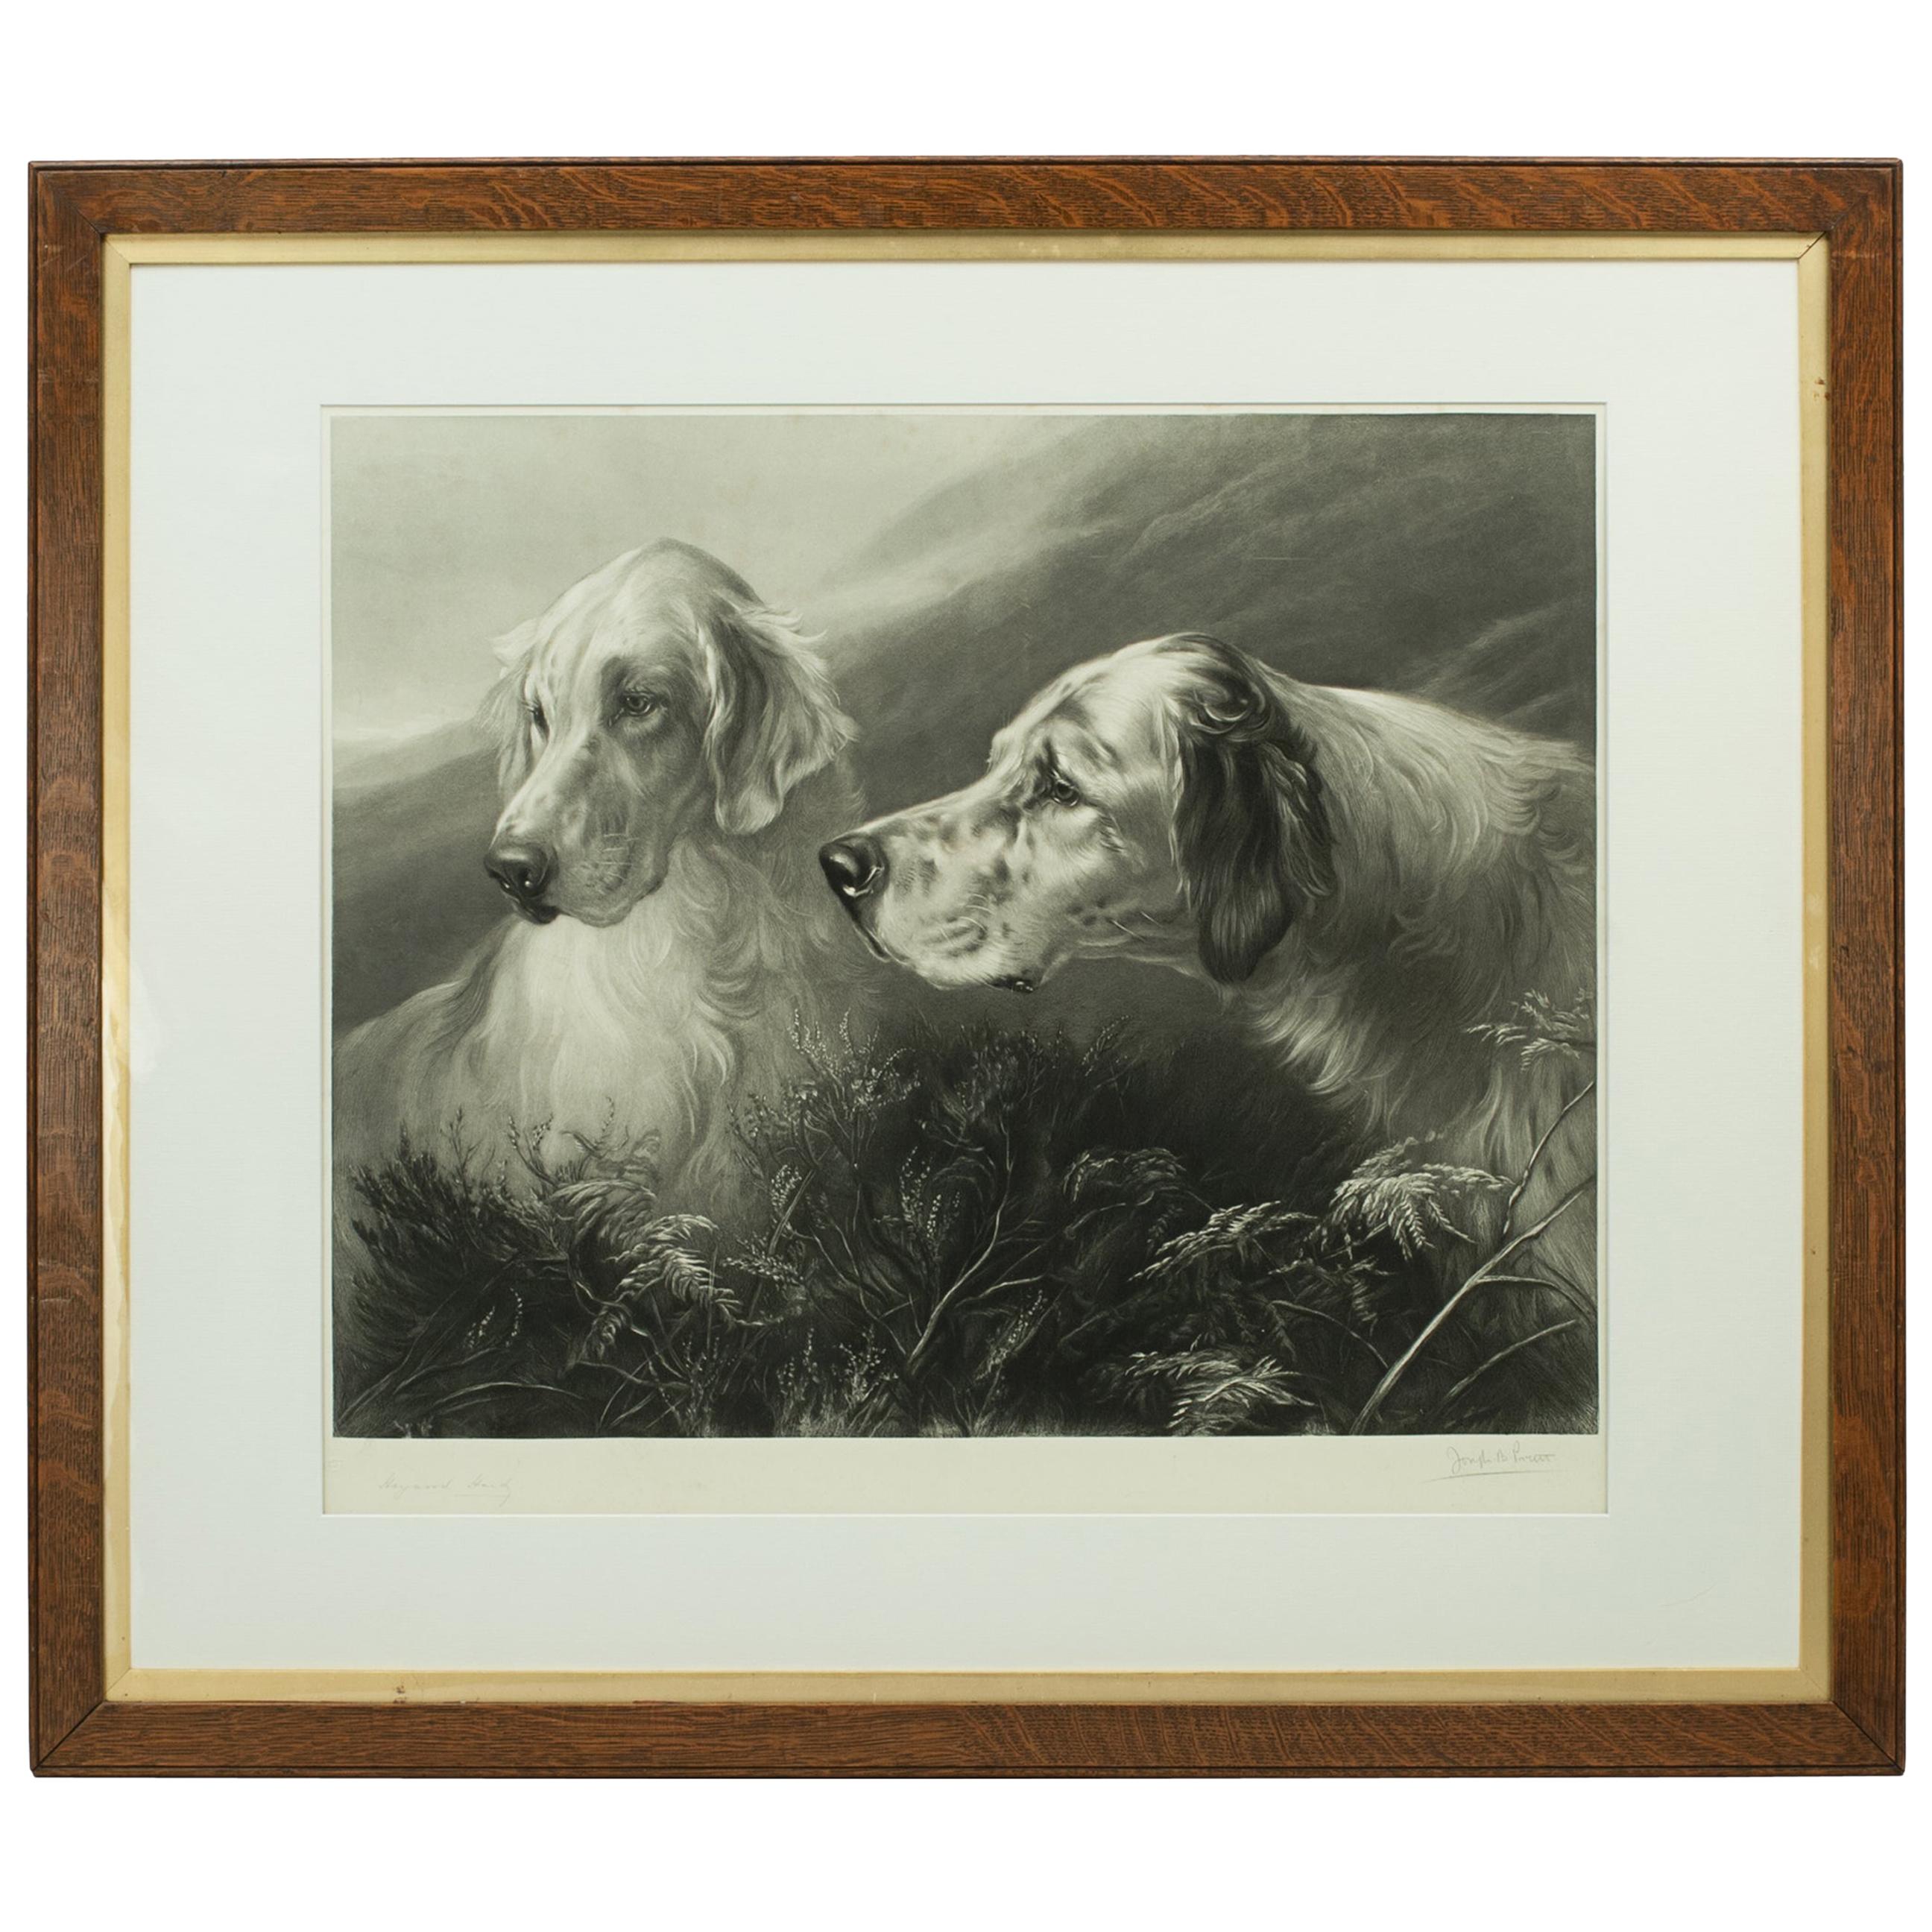 Shooting Dog Engraving, Setters at Work by Heywood Hardy